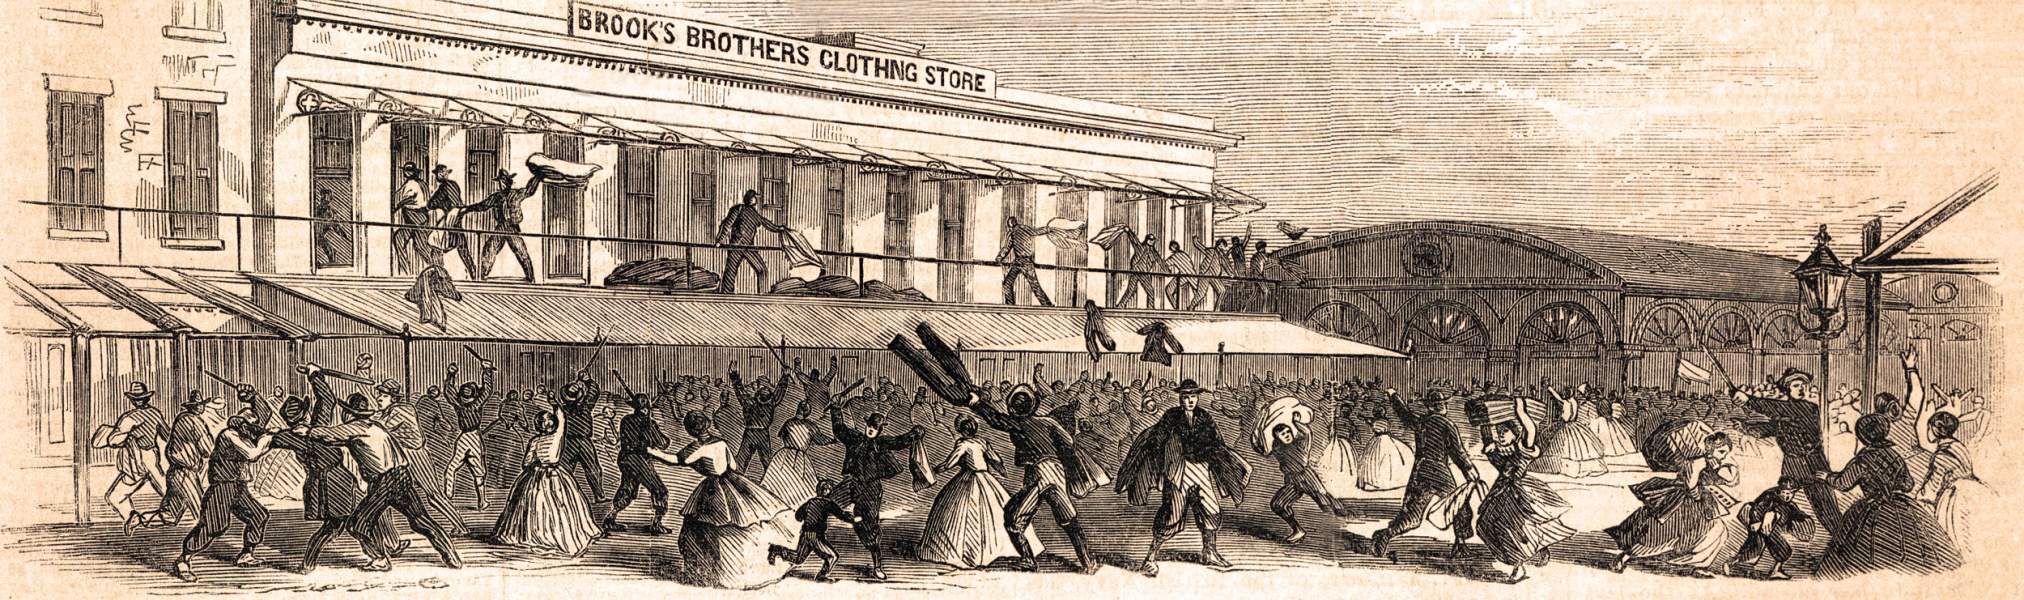 Looting of Brooks Brothers on Catherine Street, New York City, July, 1863, artist's impression, zoomable image